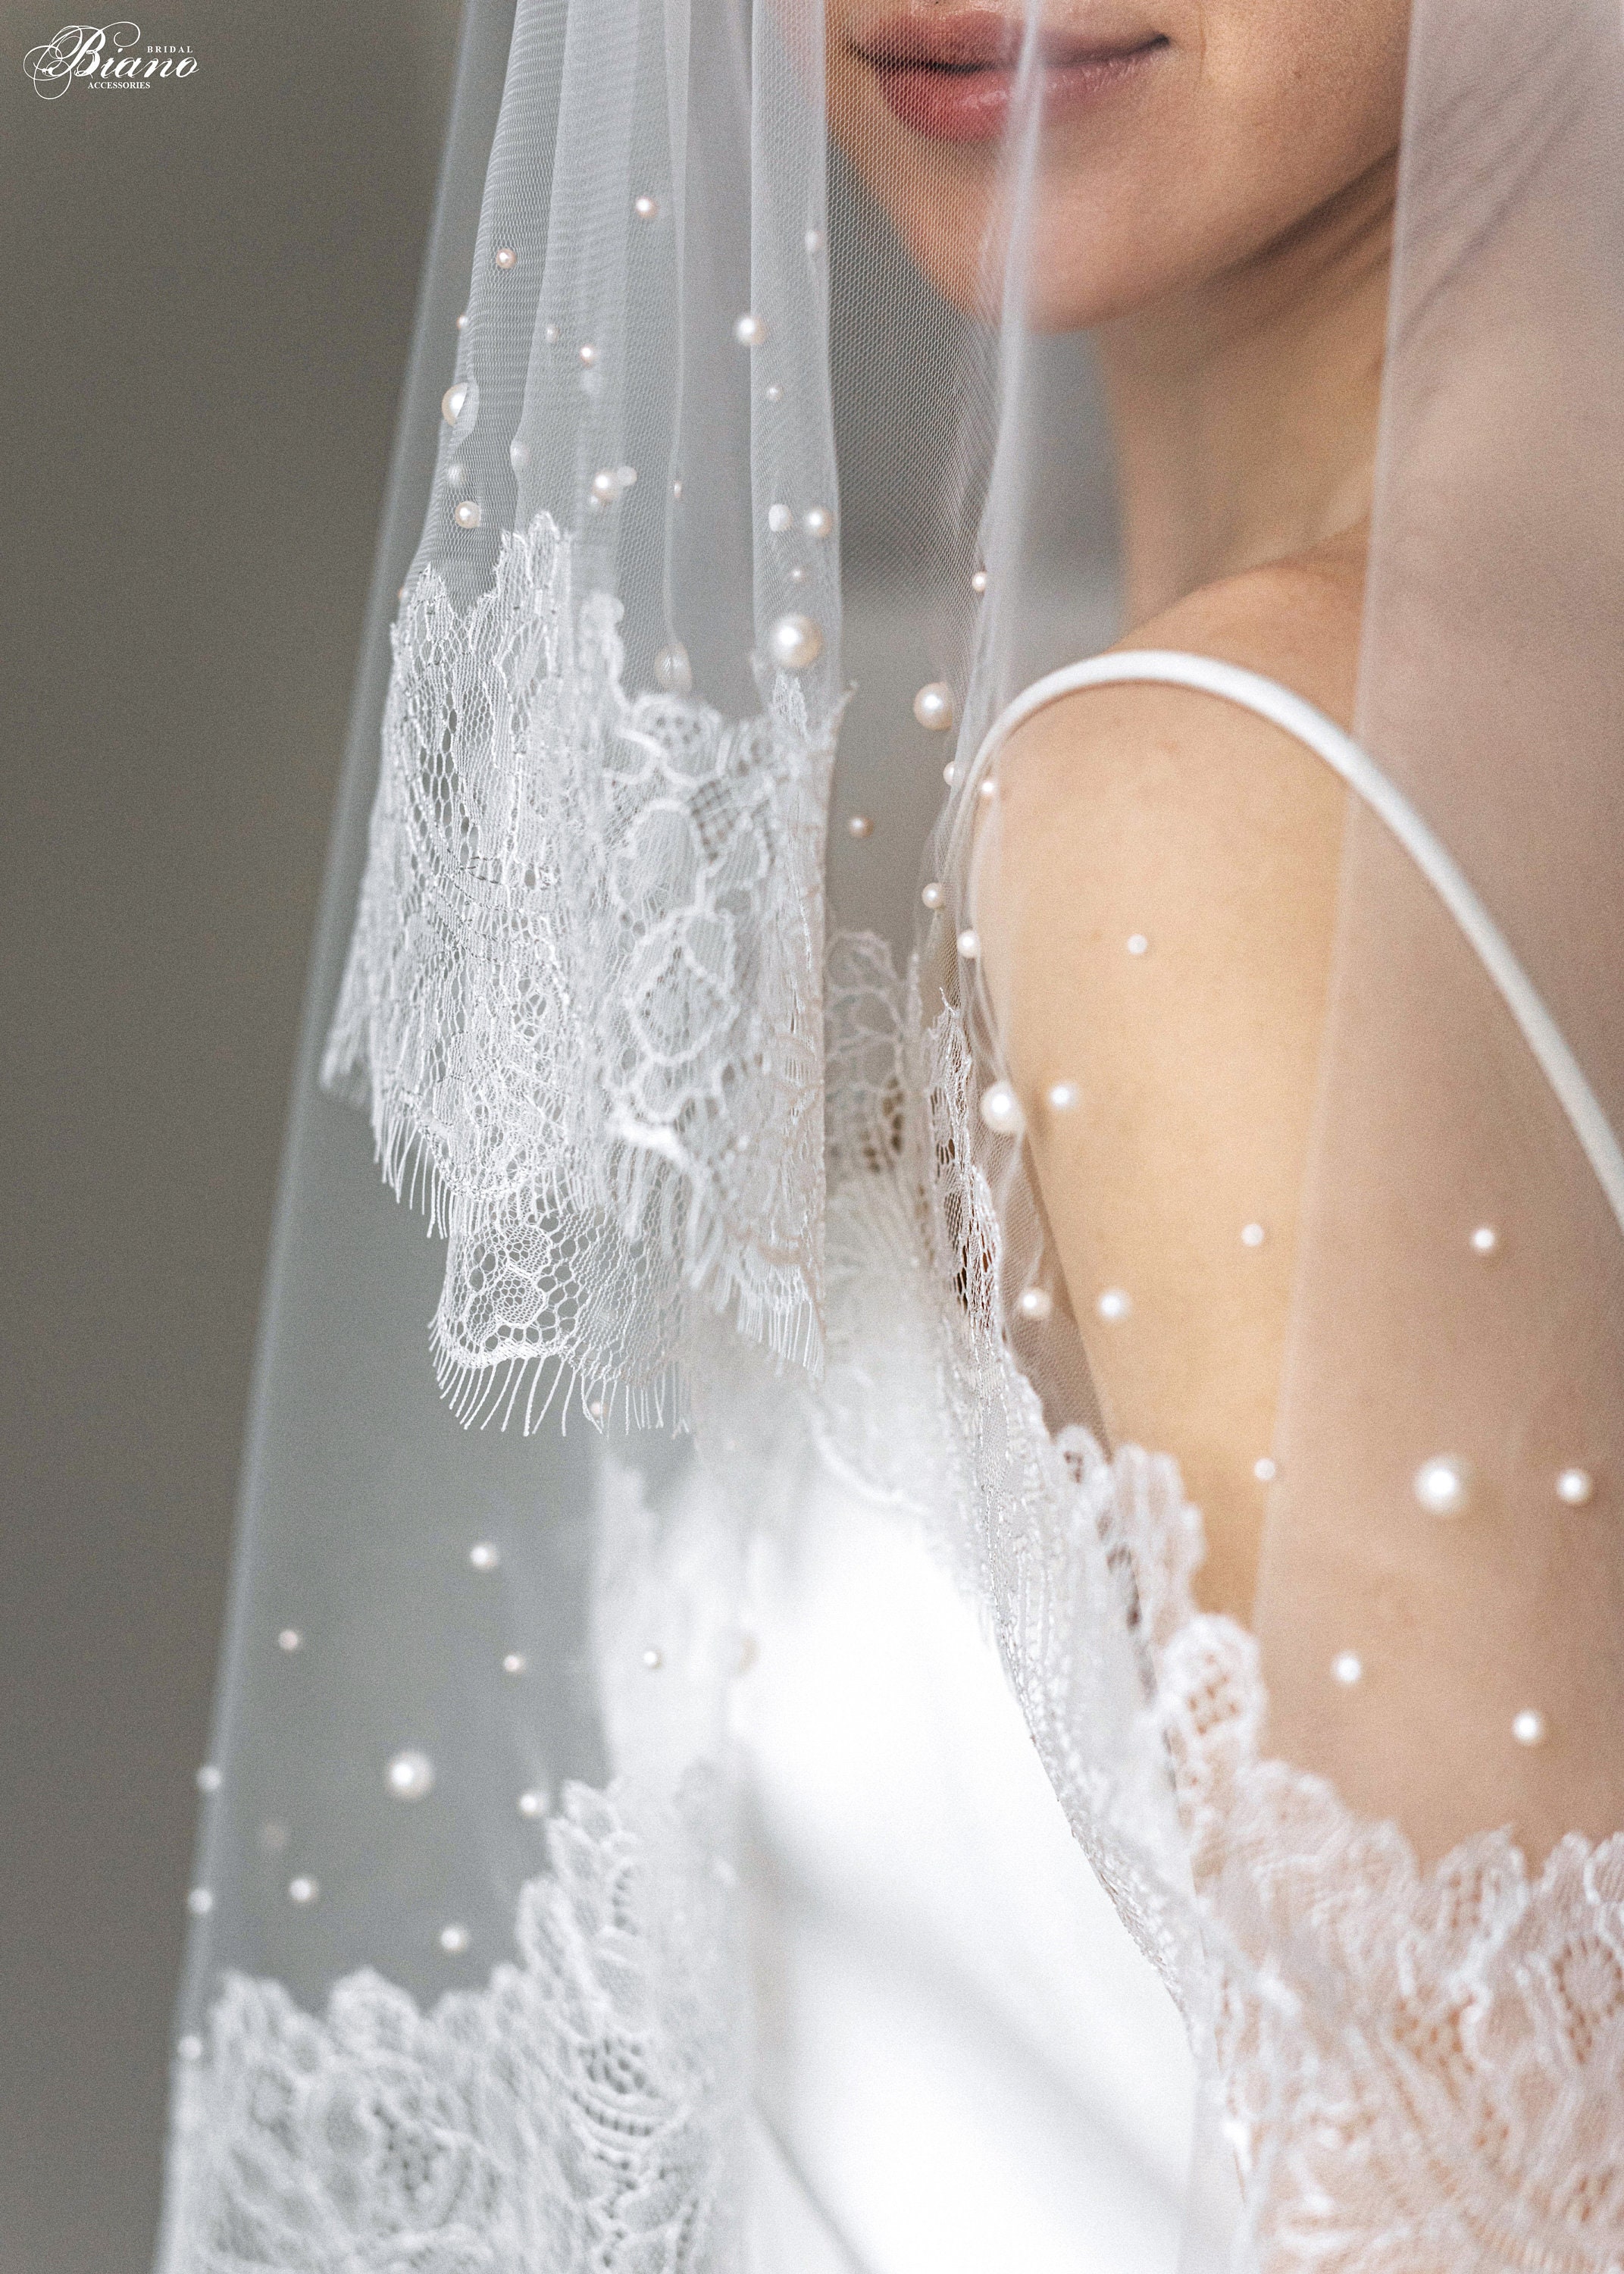 One Blushing Bride Lace Fingertip Length Wedding Veil with Thin Scallop Lace Trim Edges Light Ivory / 38-40 Inches